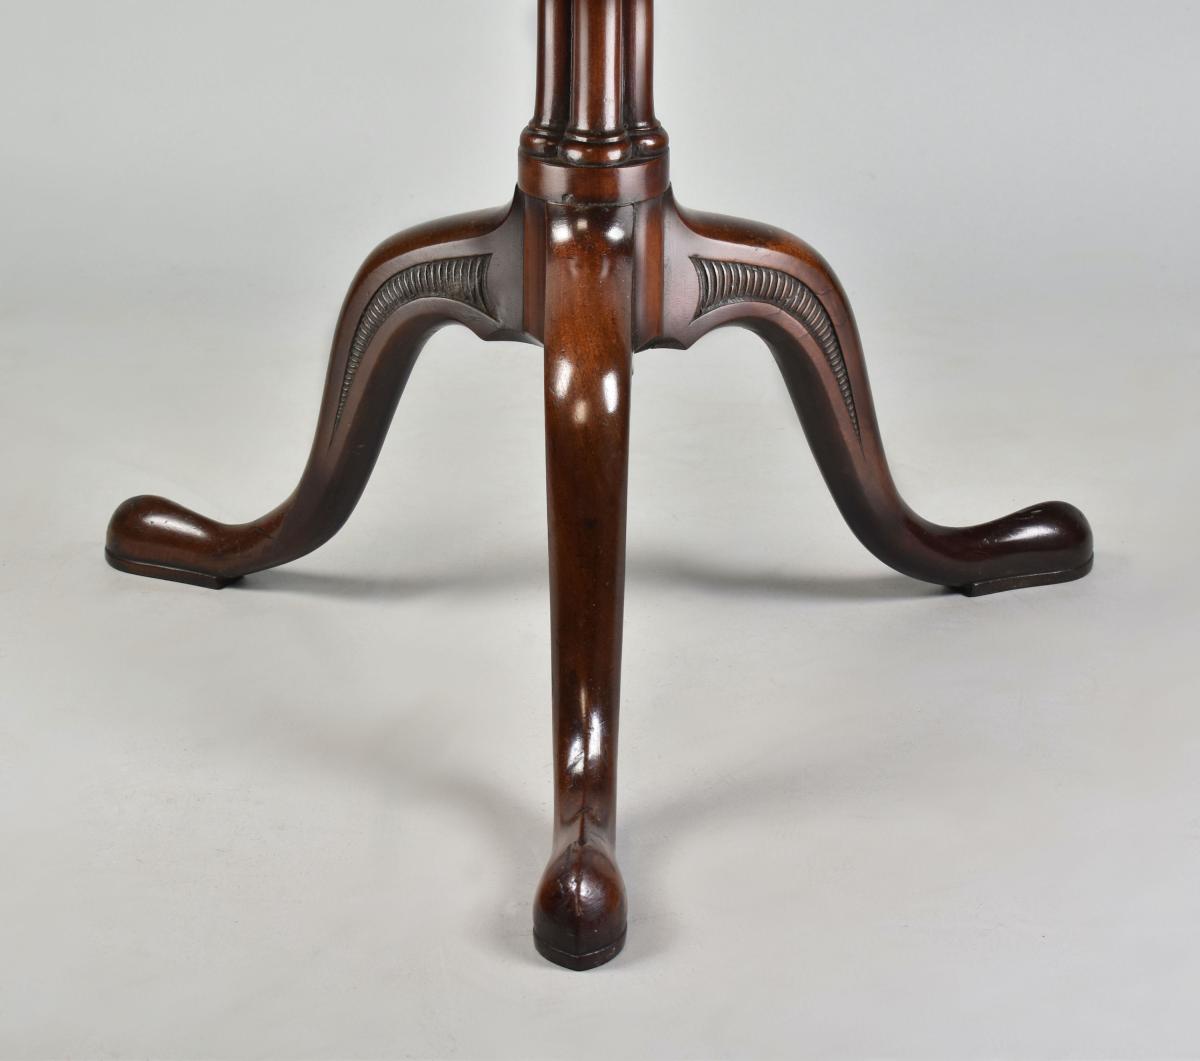 Pair George III period mahogany torcheres on cluster column stems, c.1770